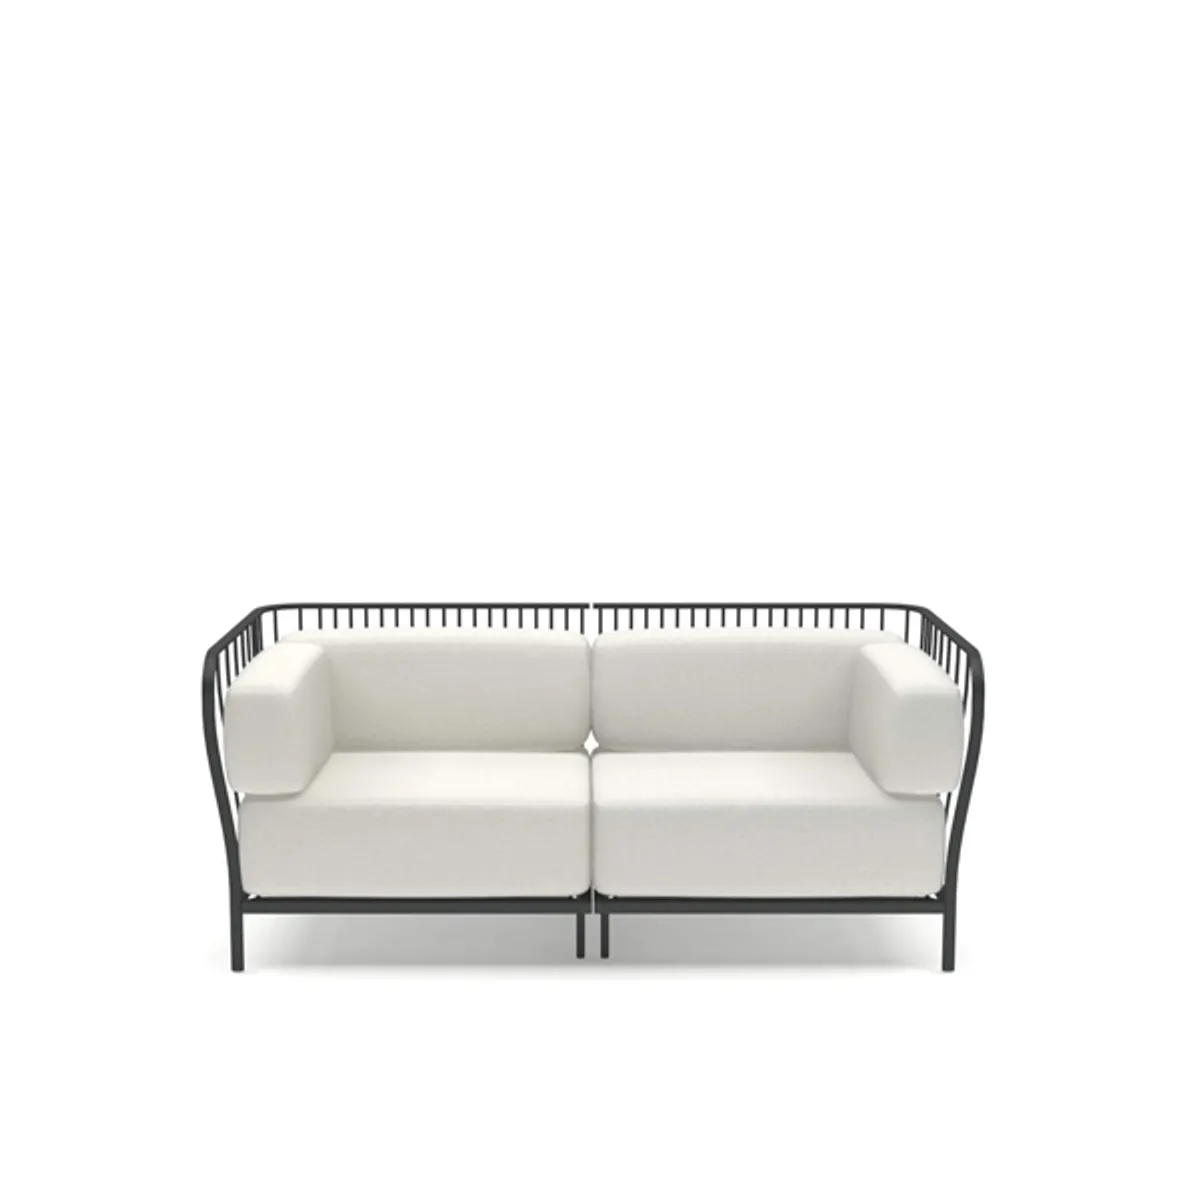 Cannole modular sofa Inside Out Contracts4